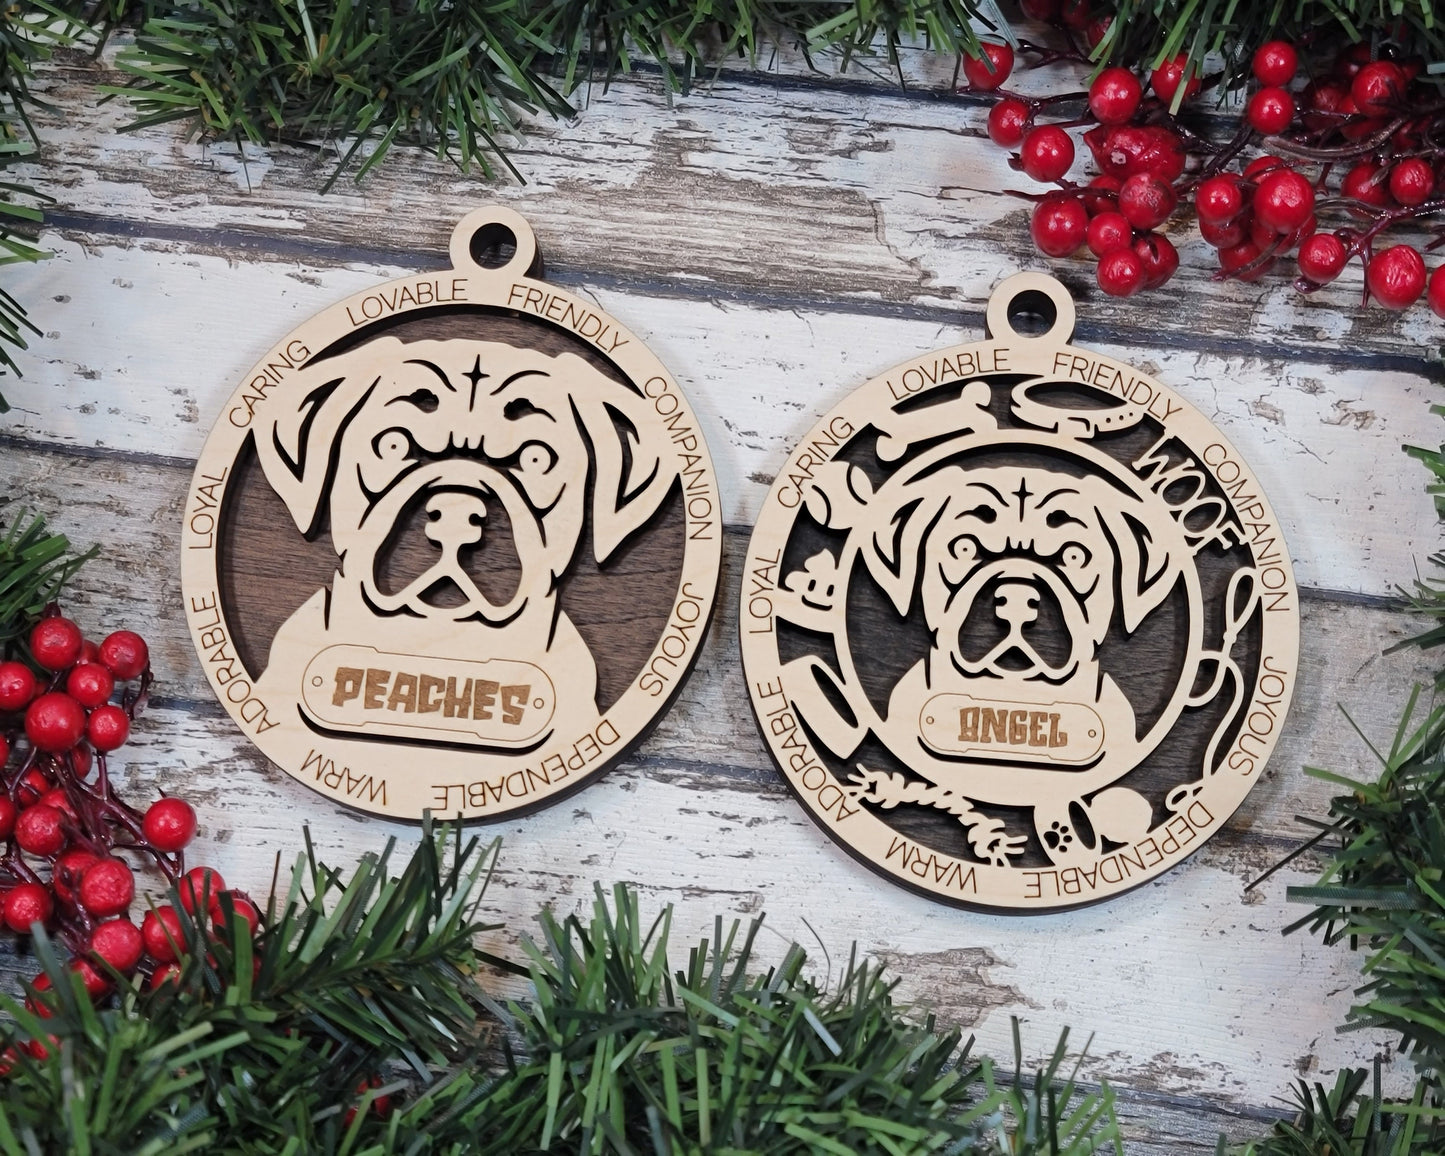 Puggle - Adorable Dog Ornaments - 2 Ornaments included - SVG, PDF, AI File Download - Sized for Glowforge